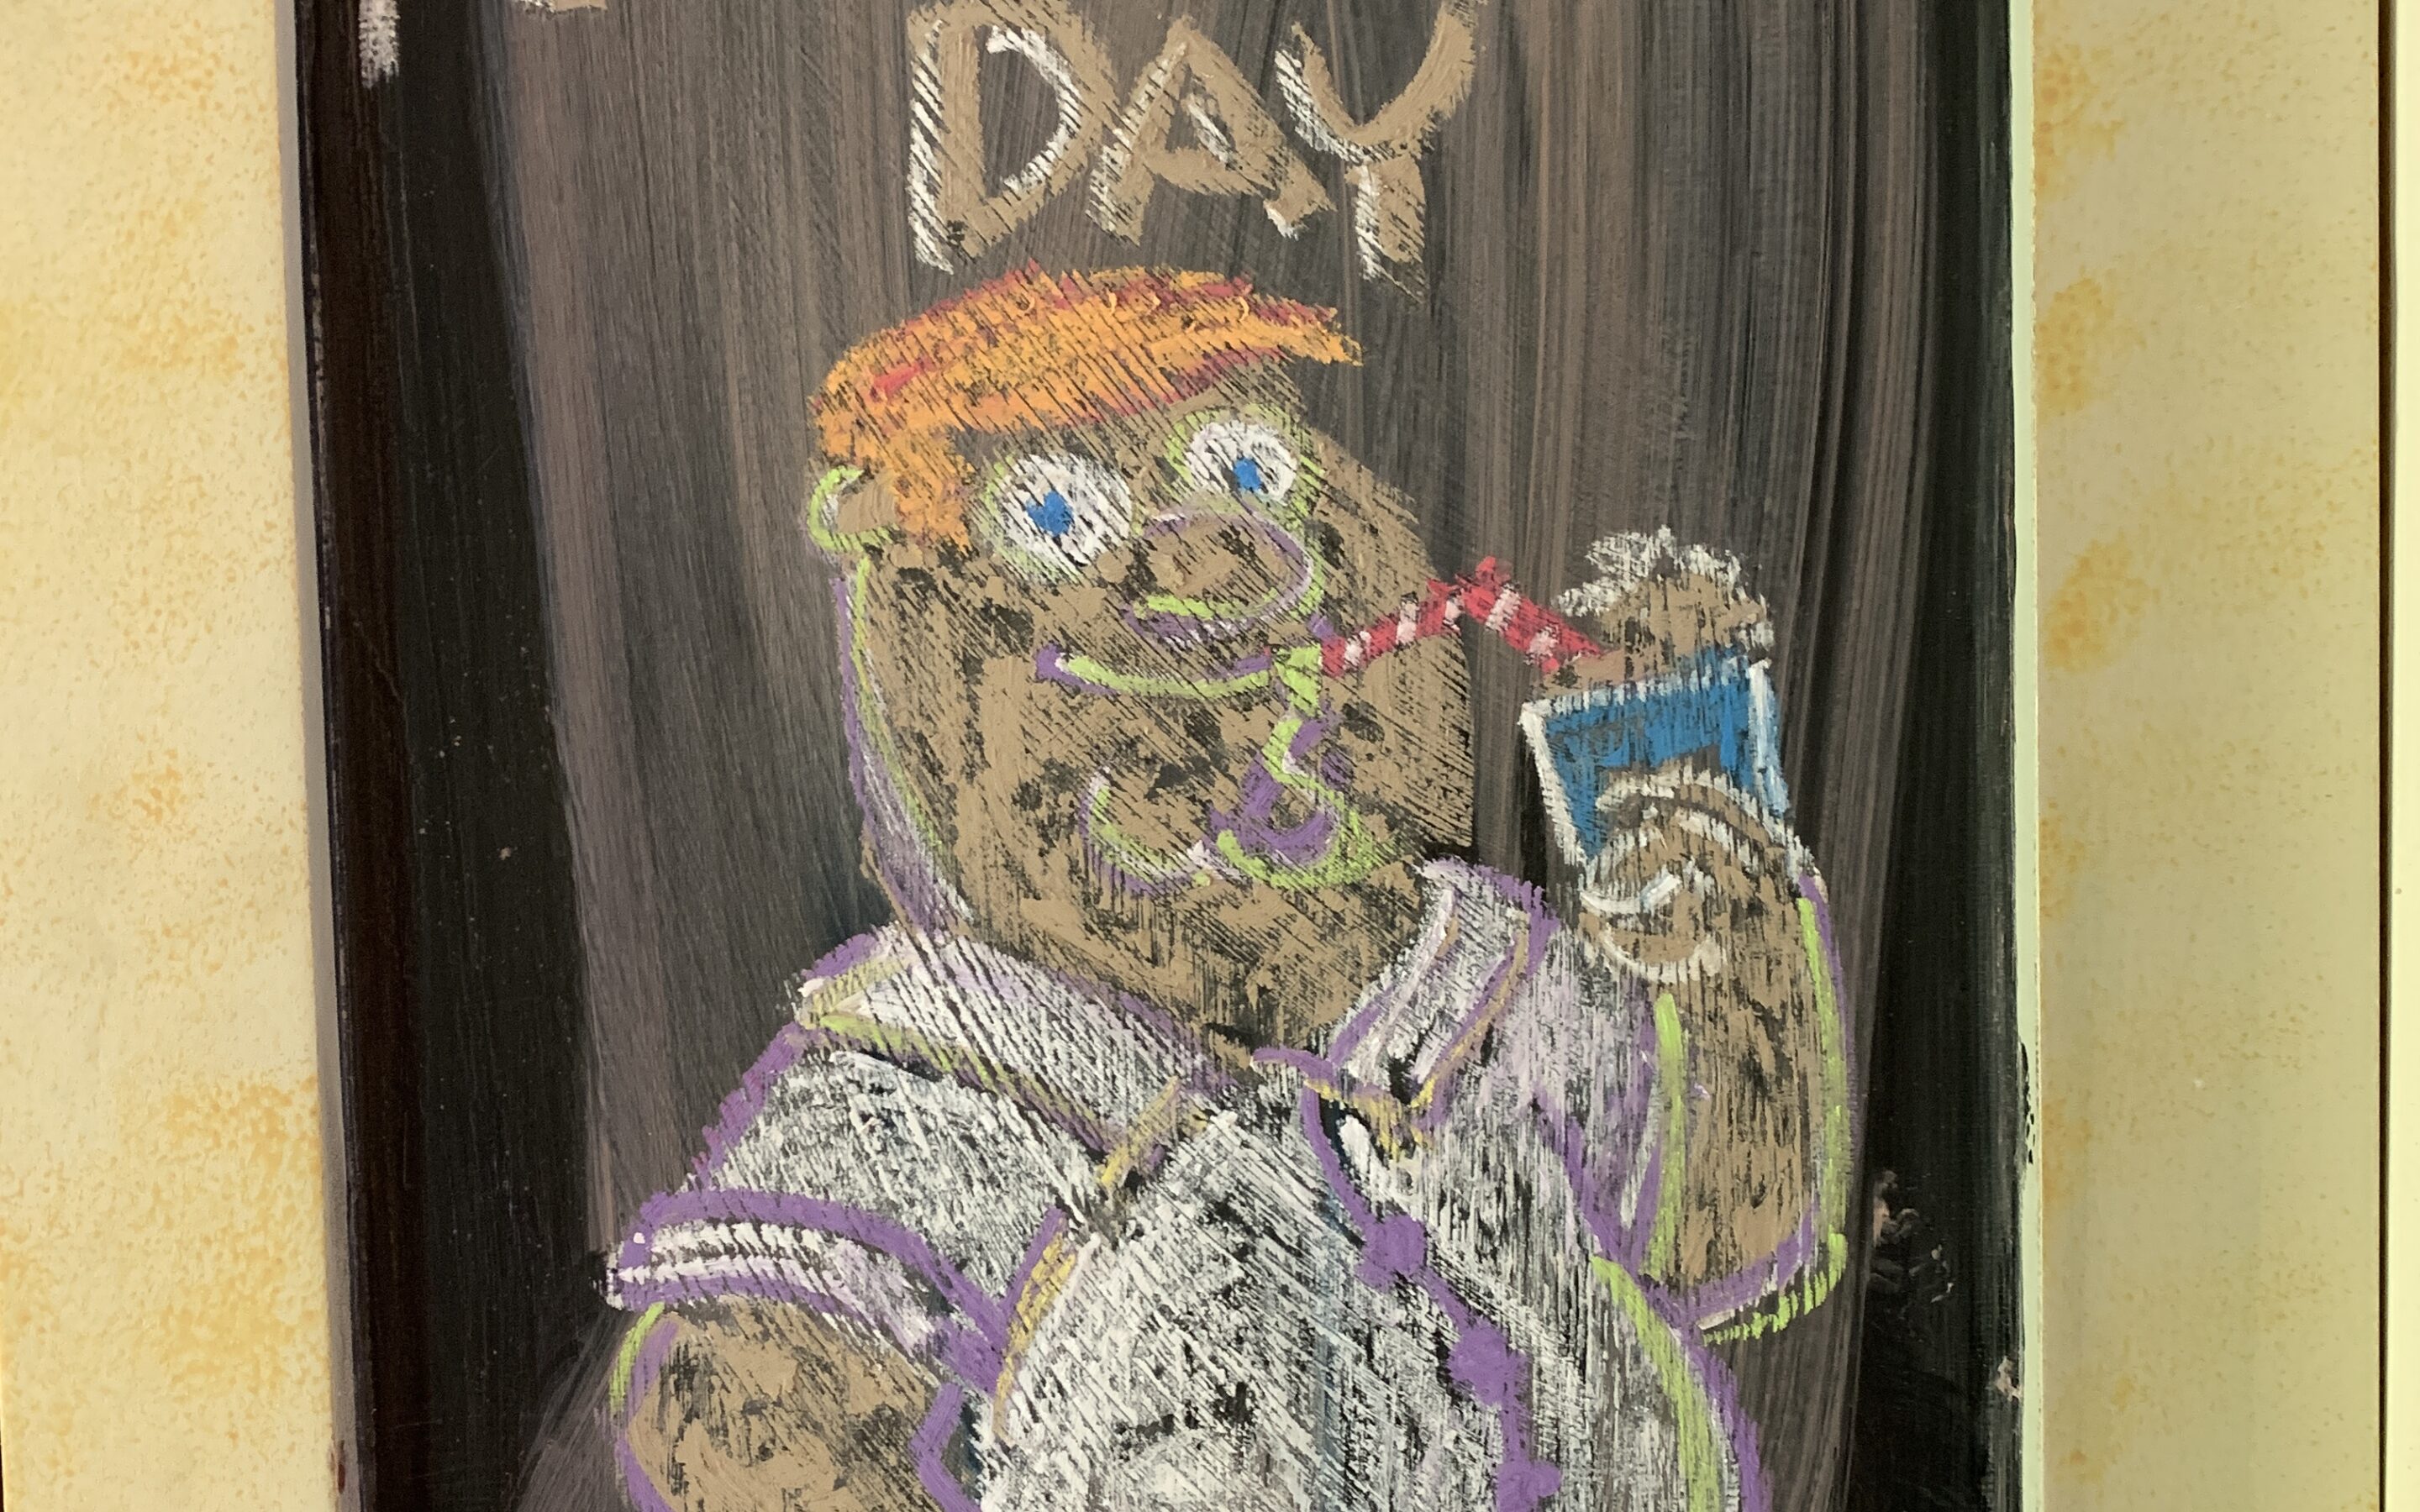 More Daily Chalkboard Holiday Artwork